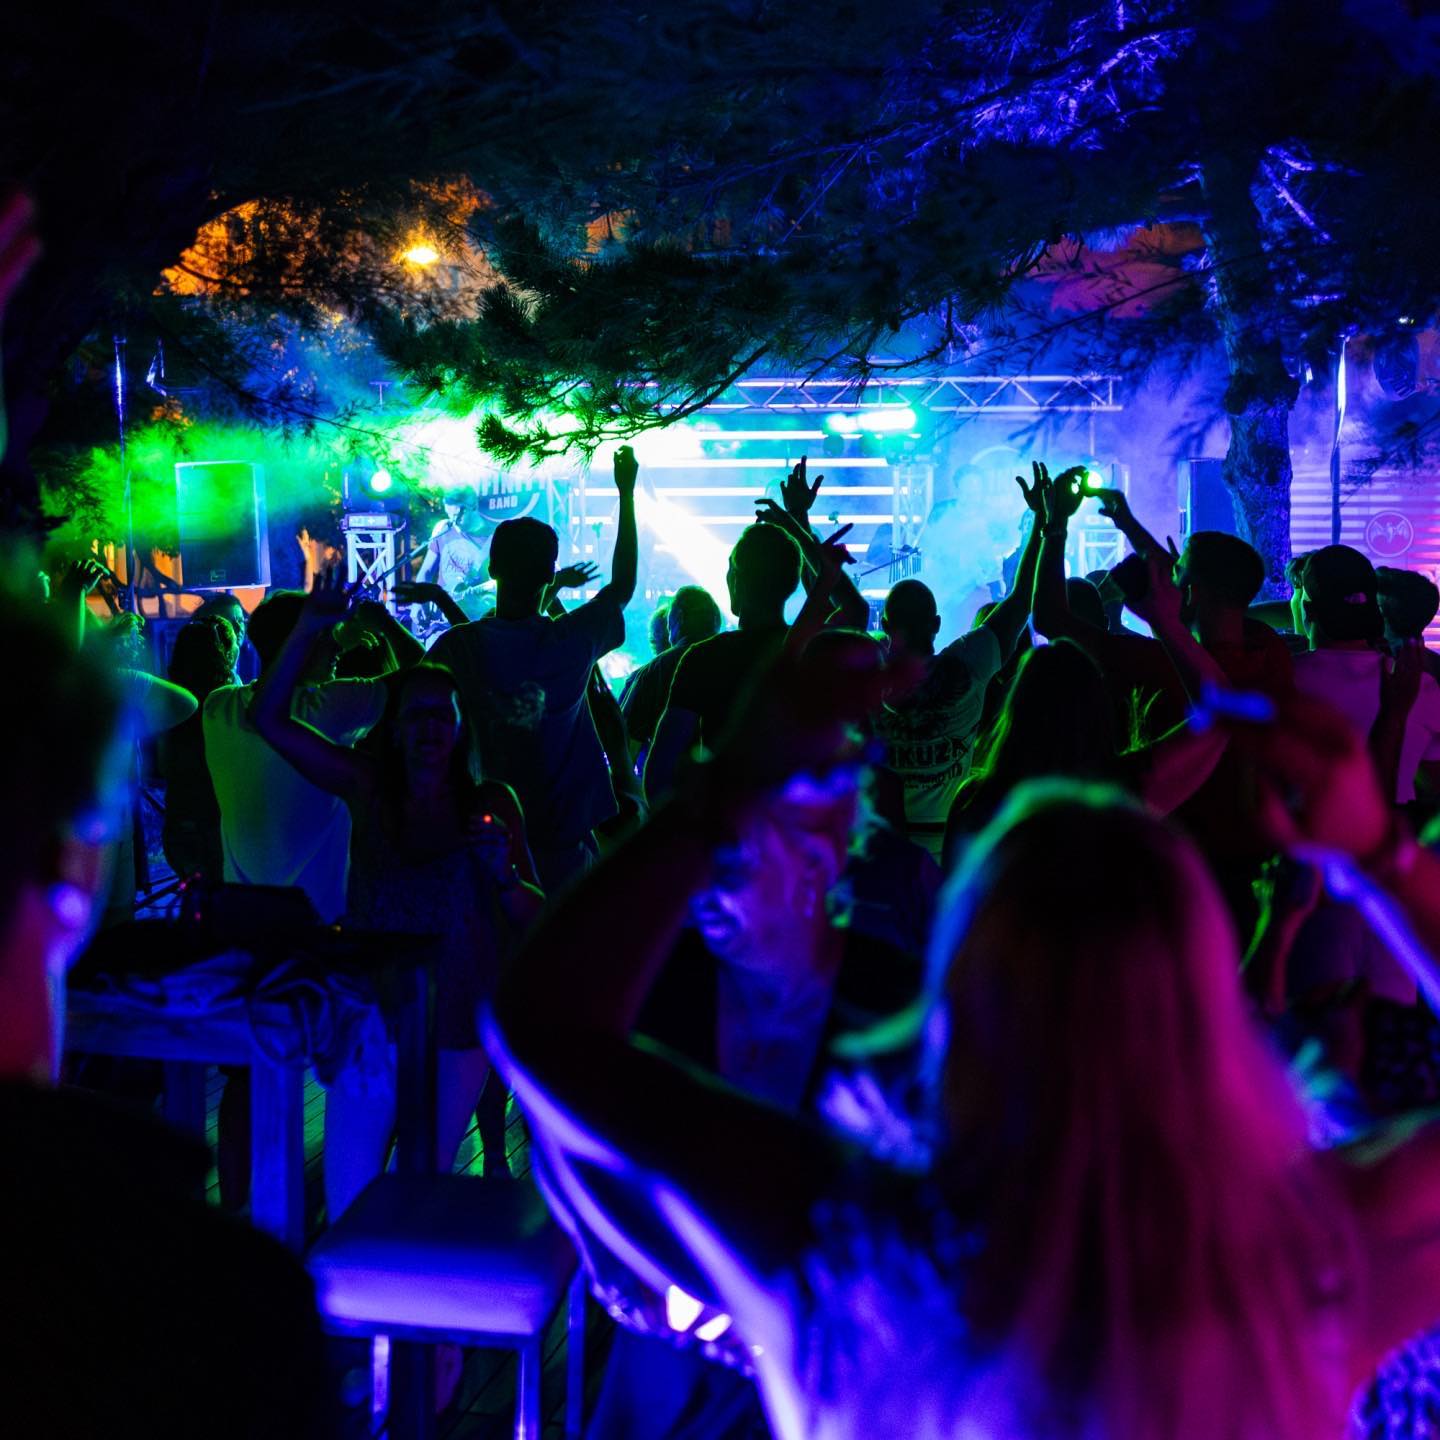 Best beach bars lounge bars and night clubs in Croatia for charter guests ()